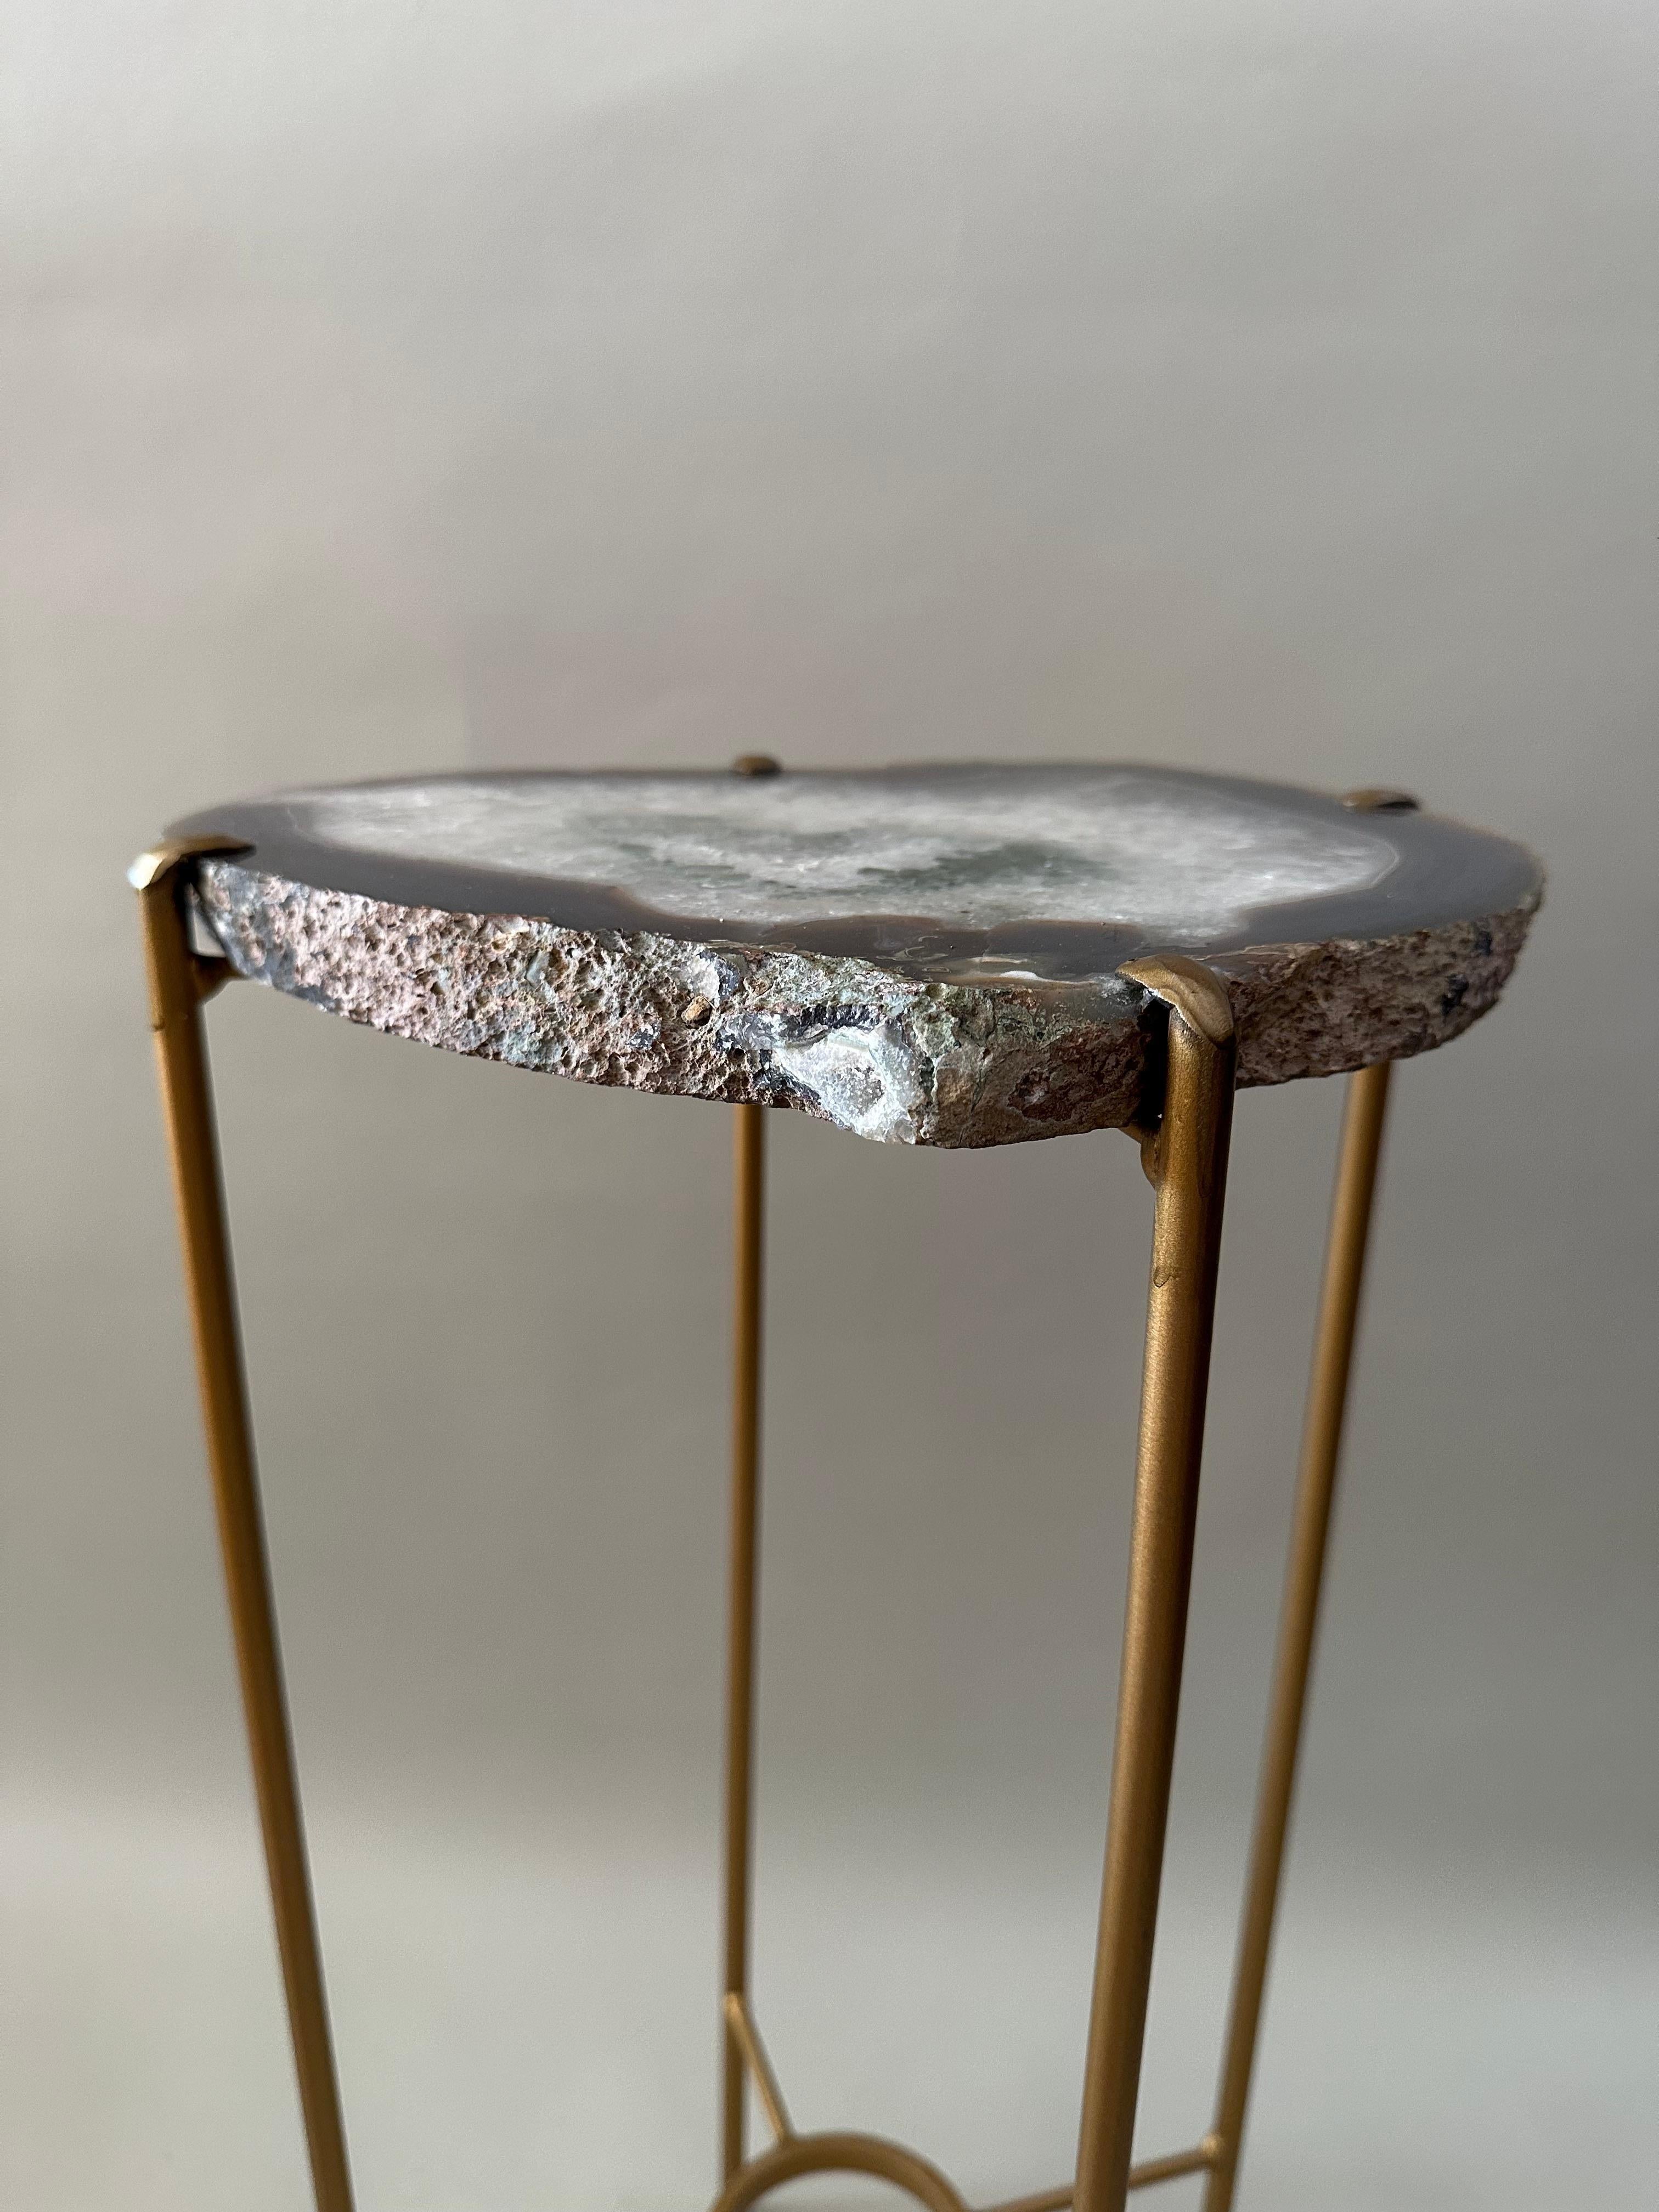 Unusual Modern Handcrafted Geode Drinks Table In Excellent Condition For Sale In Middleburg, VA